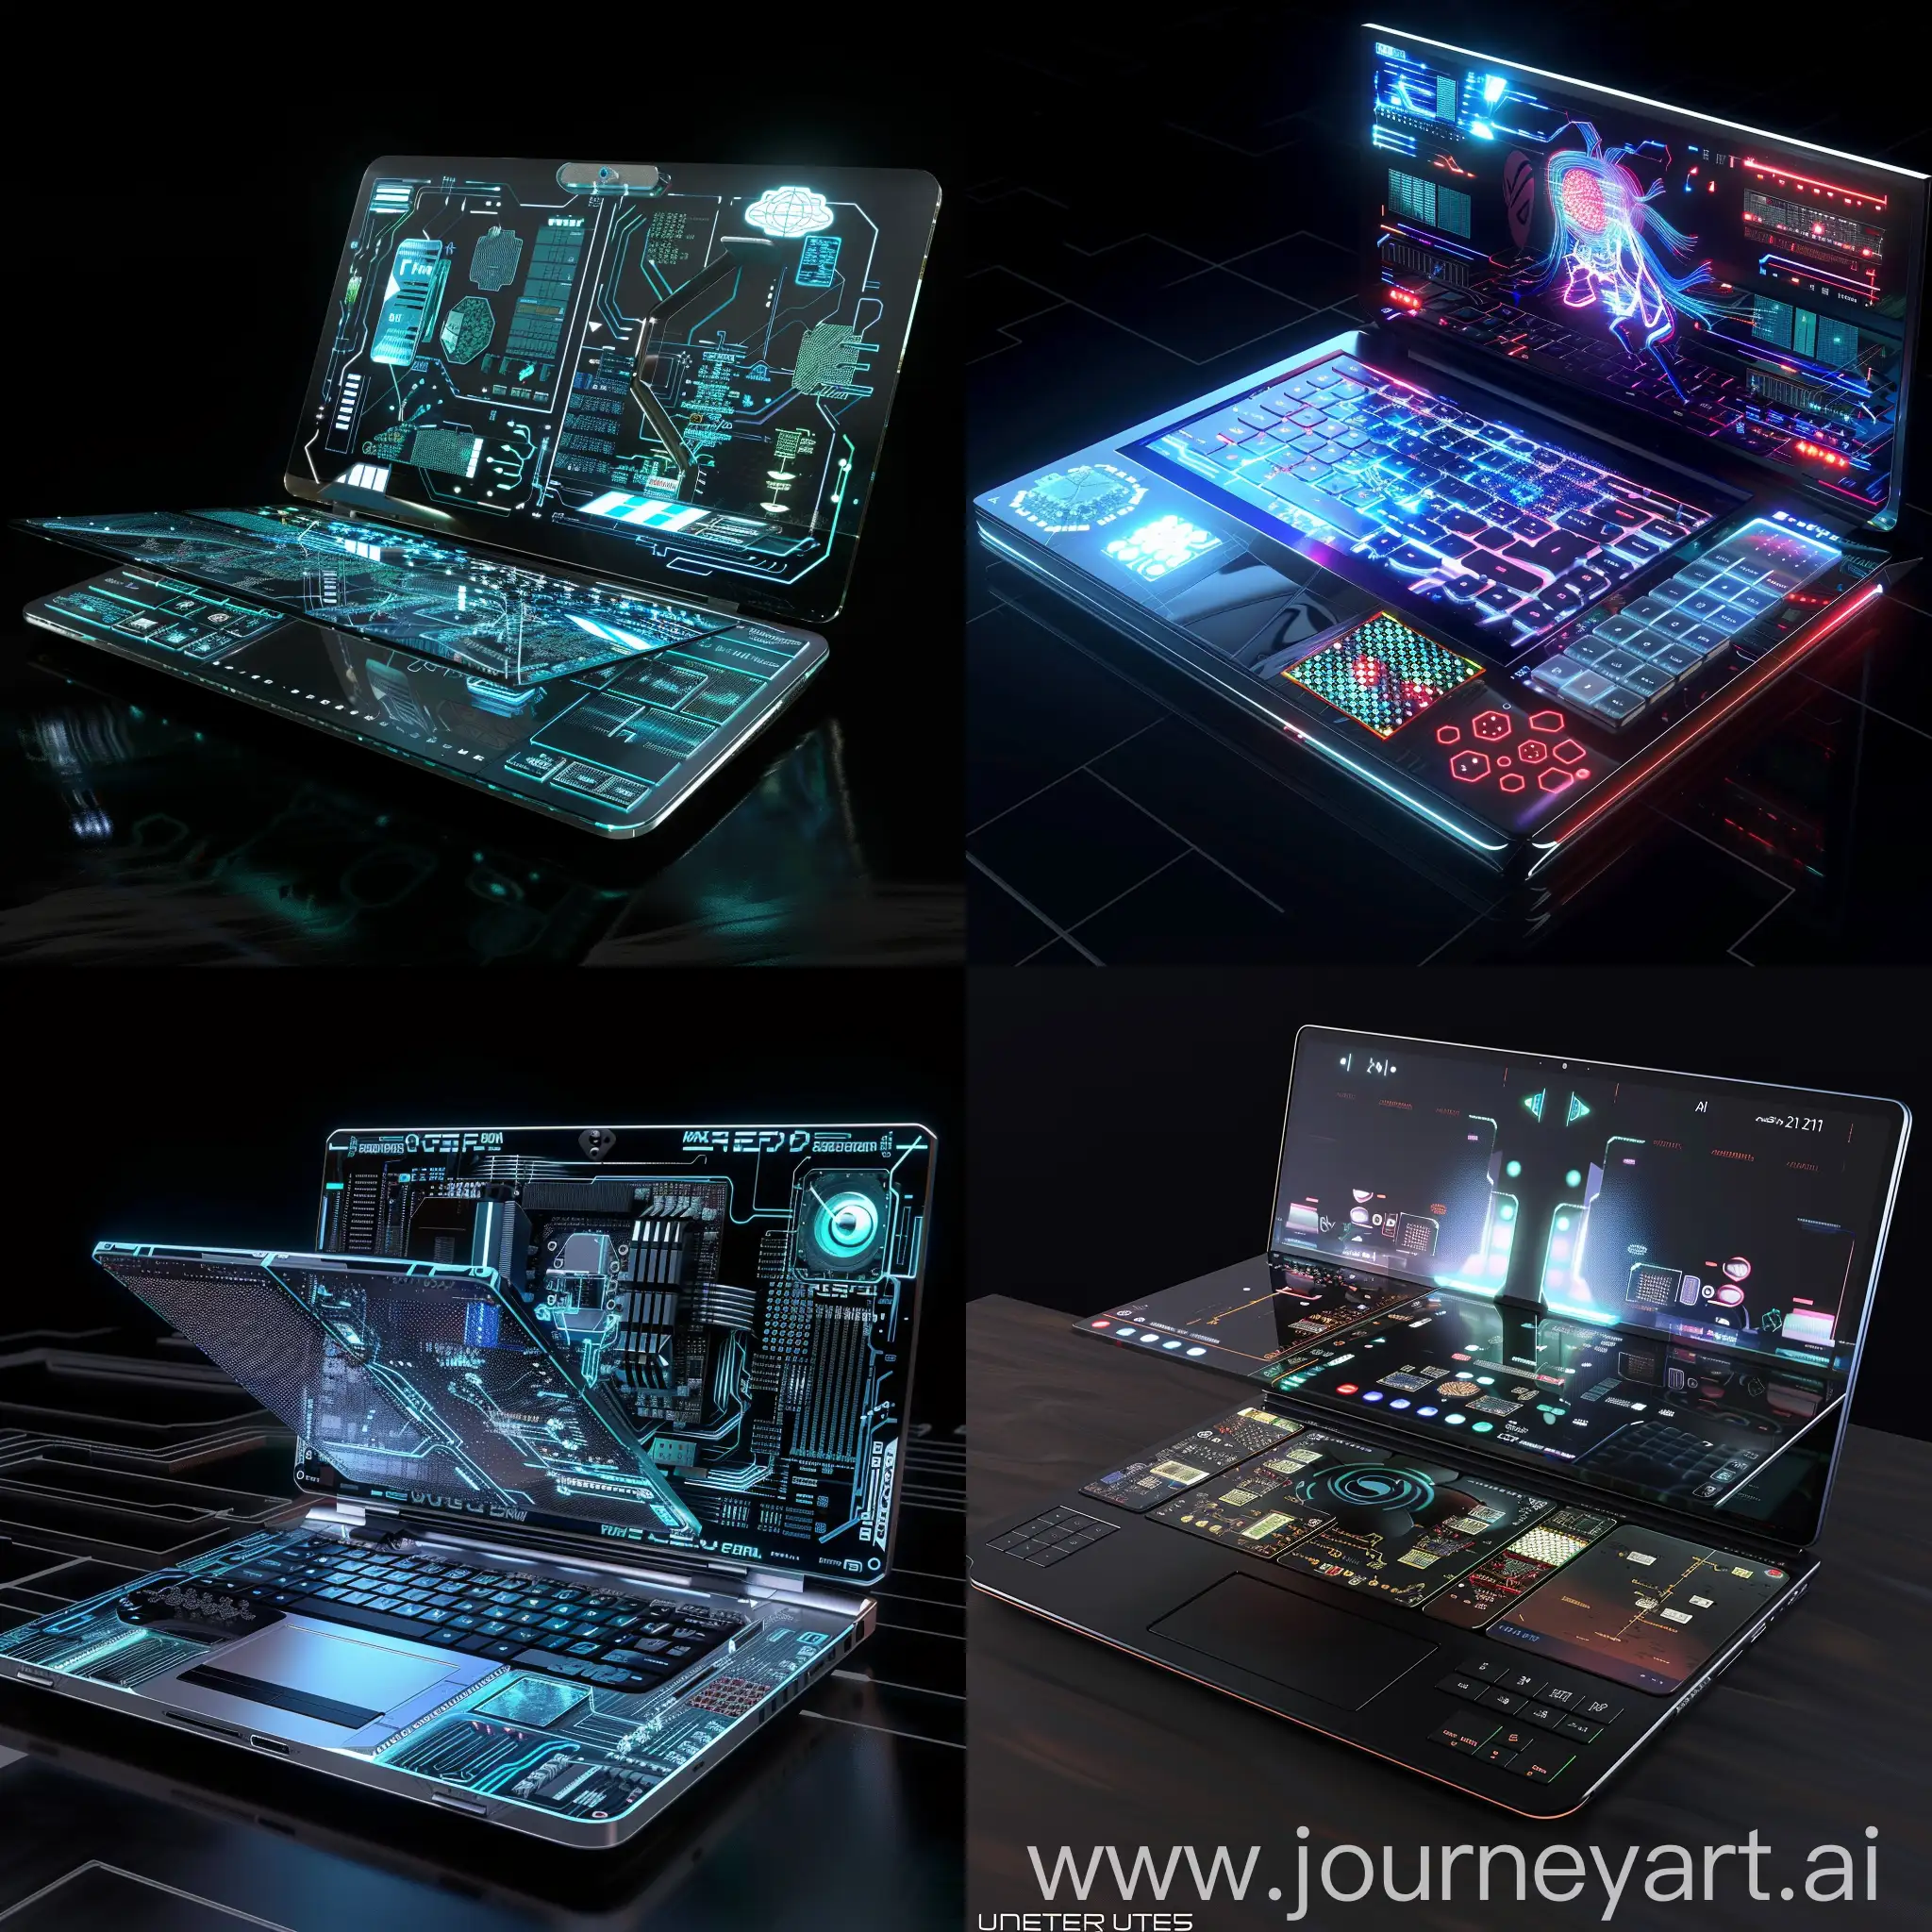 Futuristic-Quantum-Laptop-with-Holographic-Display-and-Selfrepairing-Circuits